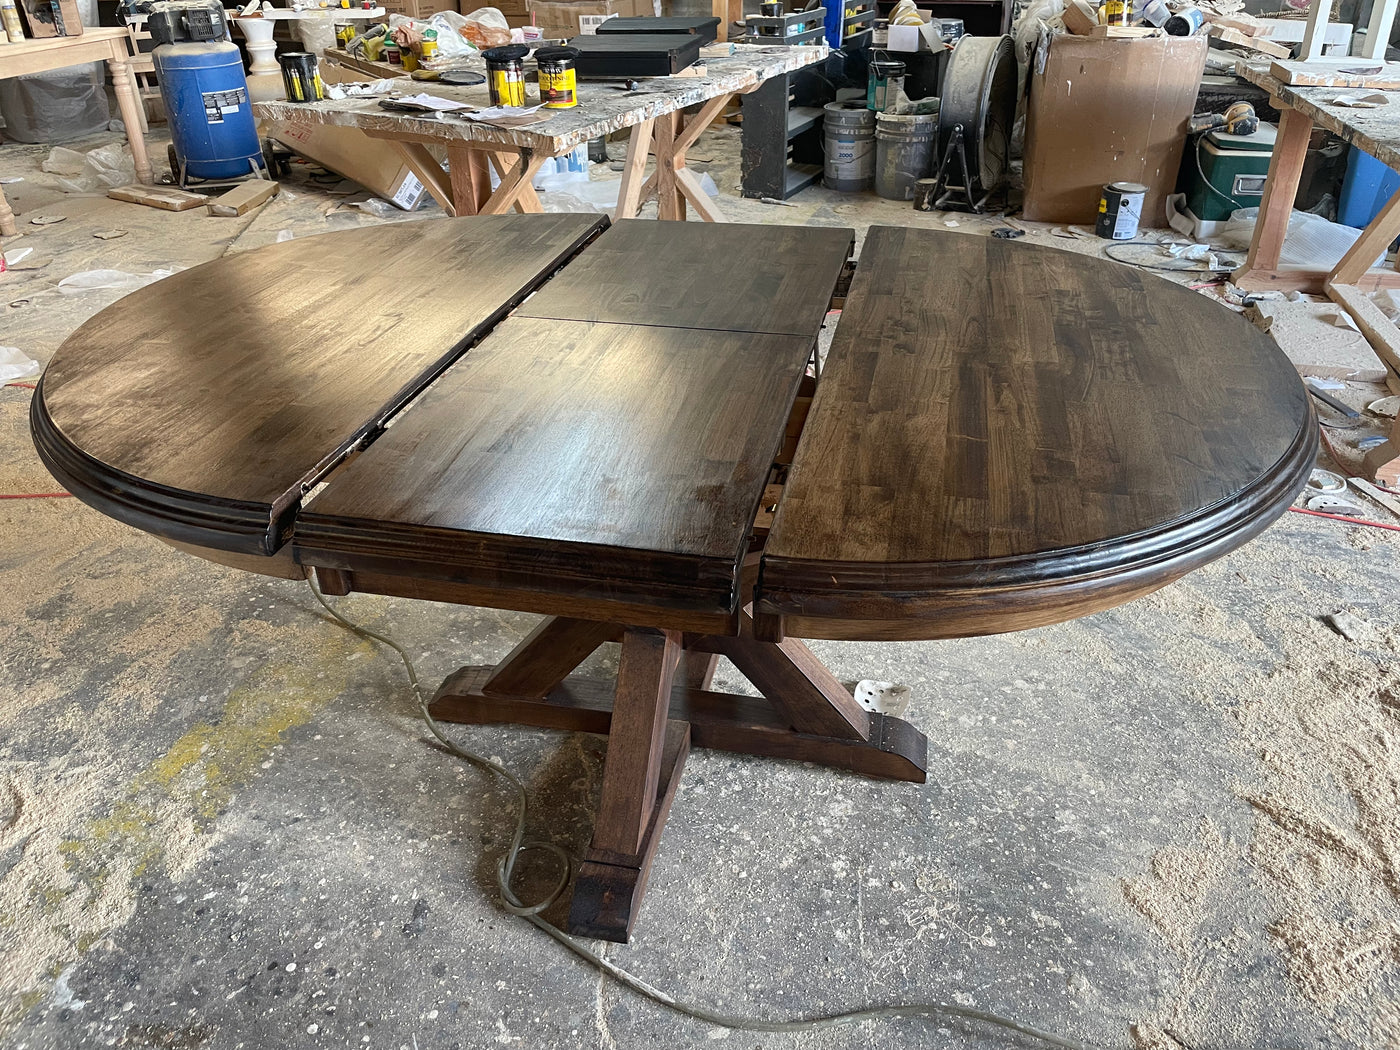 The Pierce Extension Table